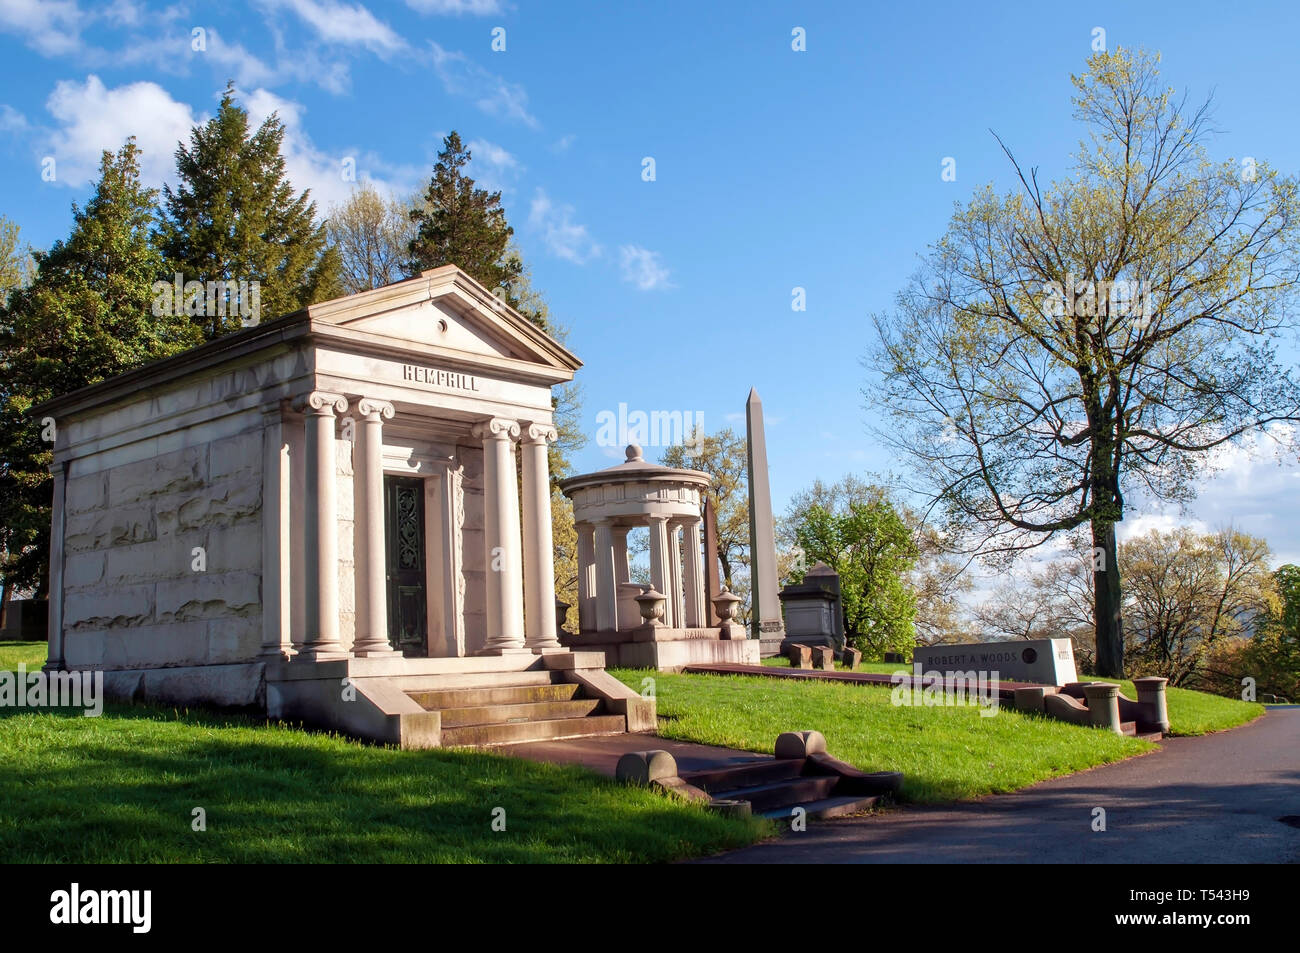 The Hemphill and Baum family mausoleums next to a road in the Homewood Cemetery in Pittsburgh, Pennsylvania, USA Stock Photo